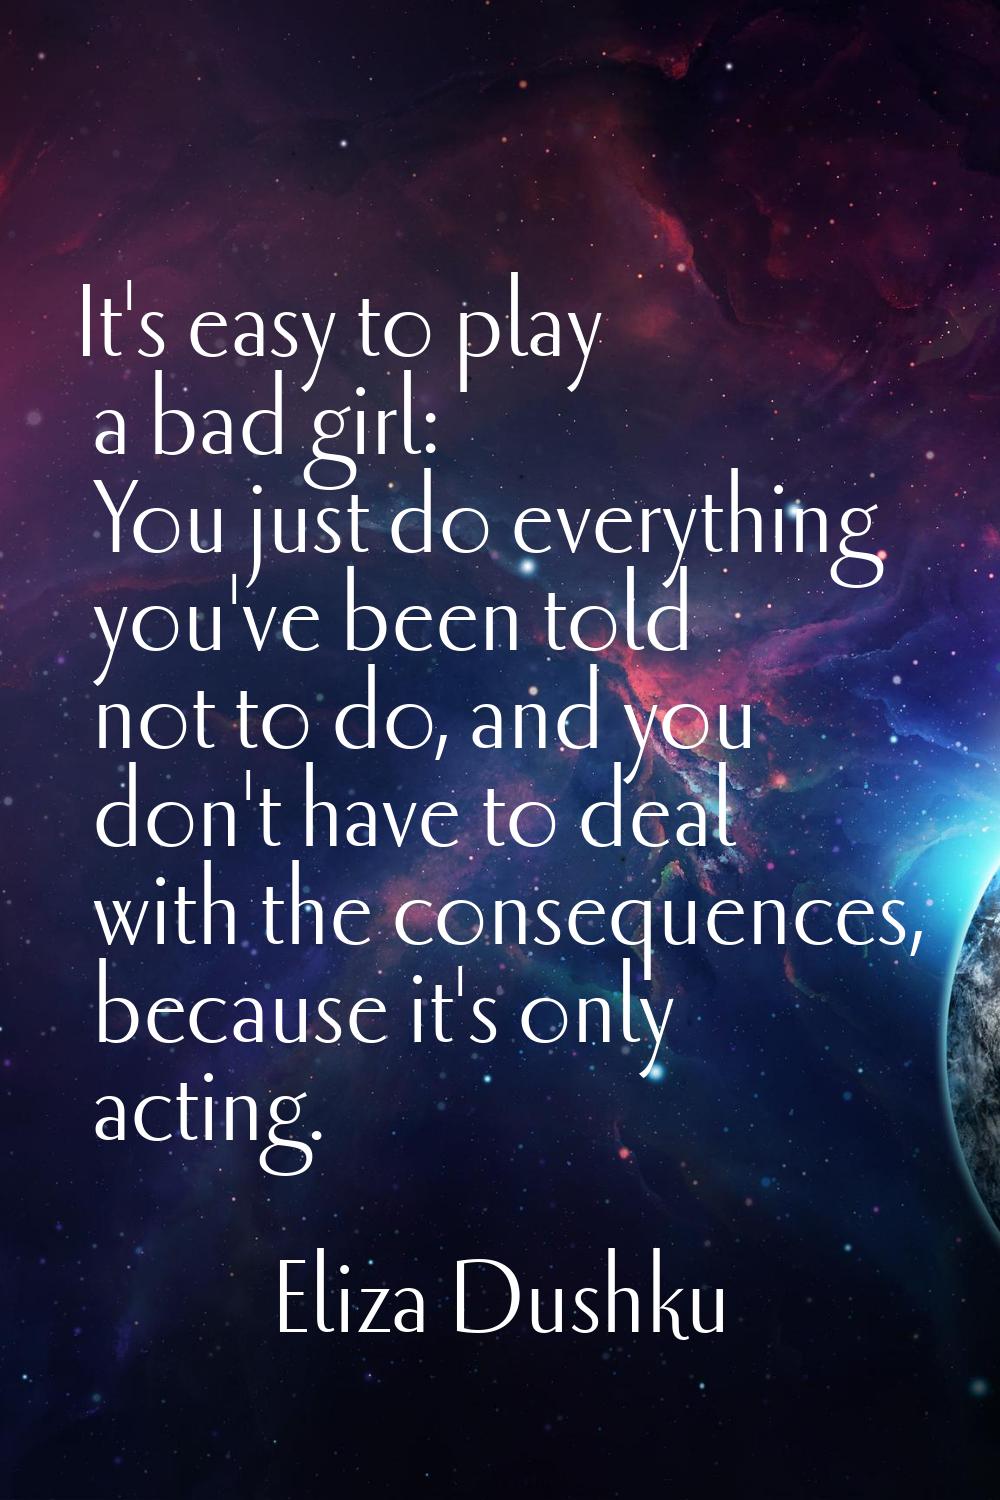 It's easy to play a bad girl: You just do everything you've been told not to do, and you don't have